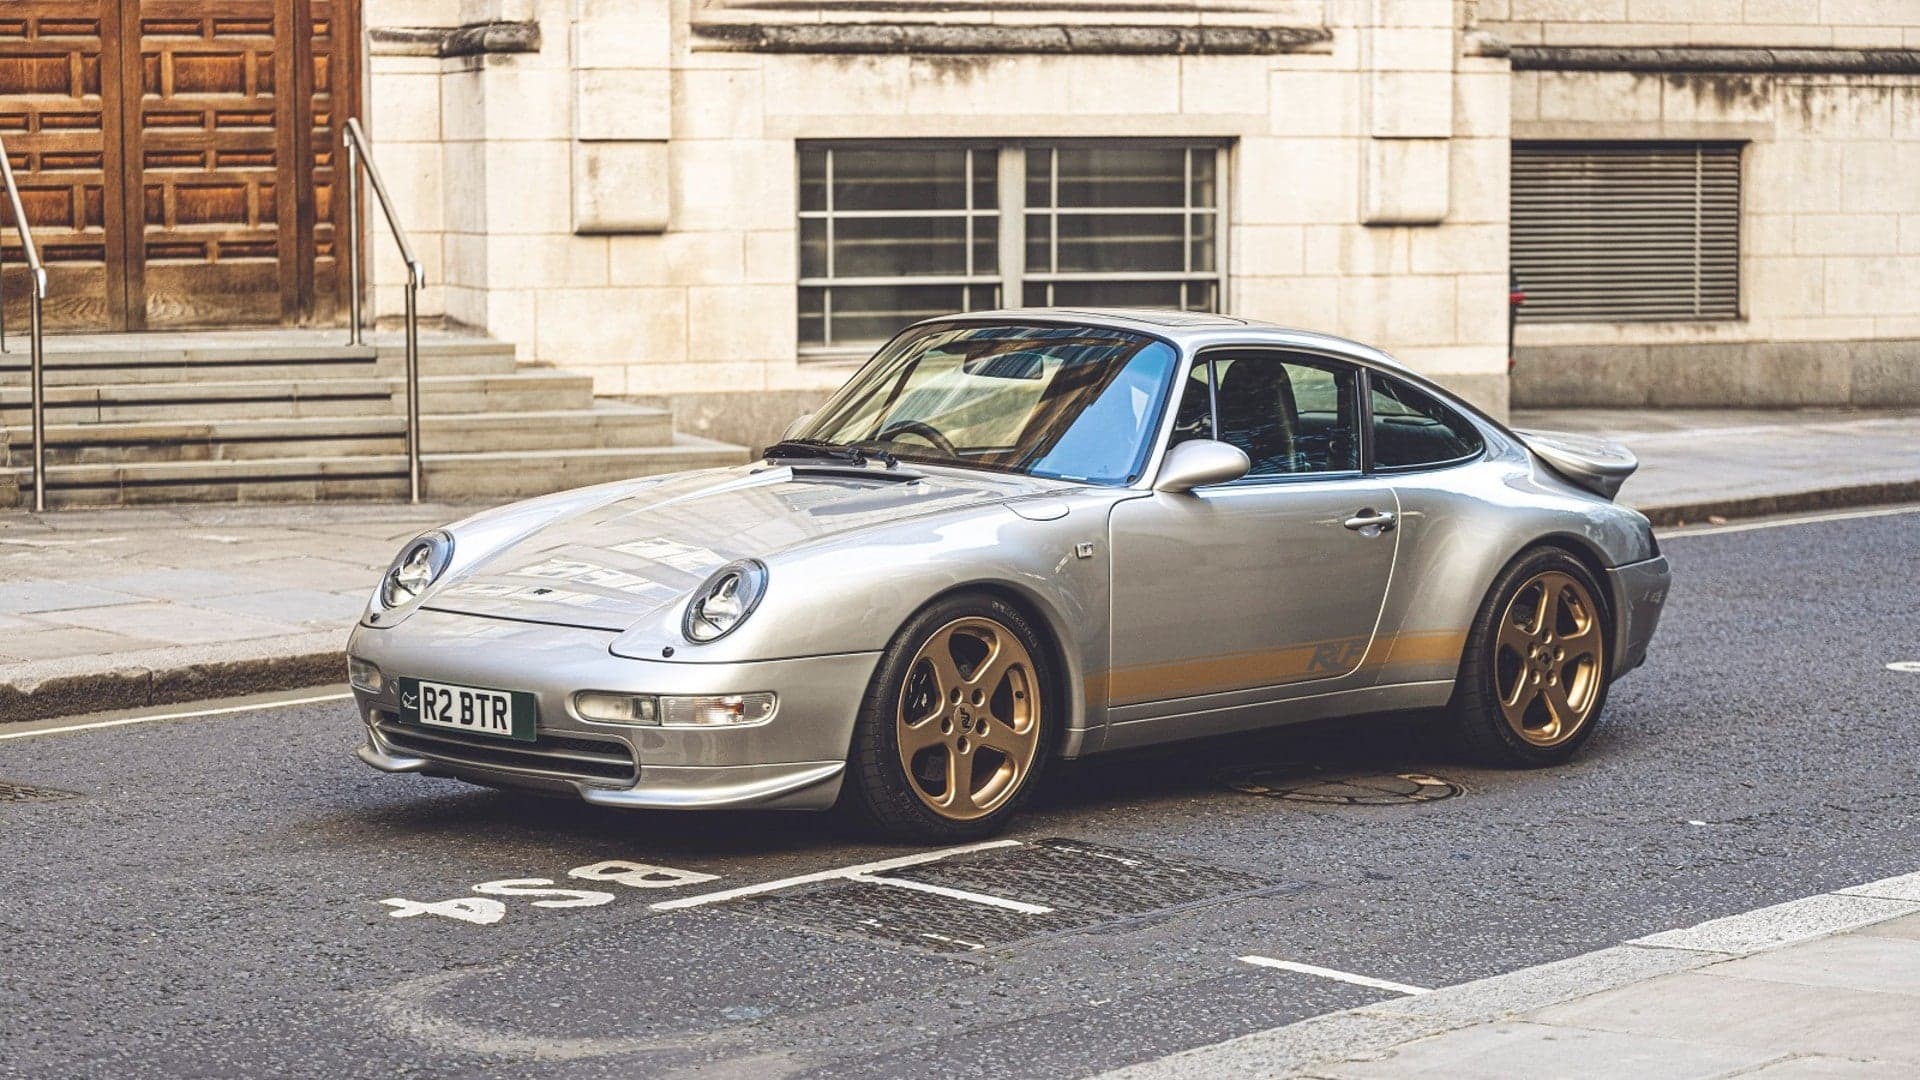 Now’s Your Chance to Own a Ruf BTR2, Arguably The Most Desirable 993 Not Built by Porsche